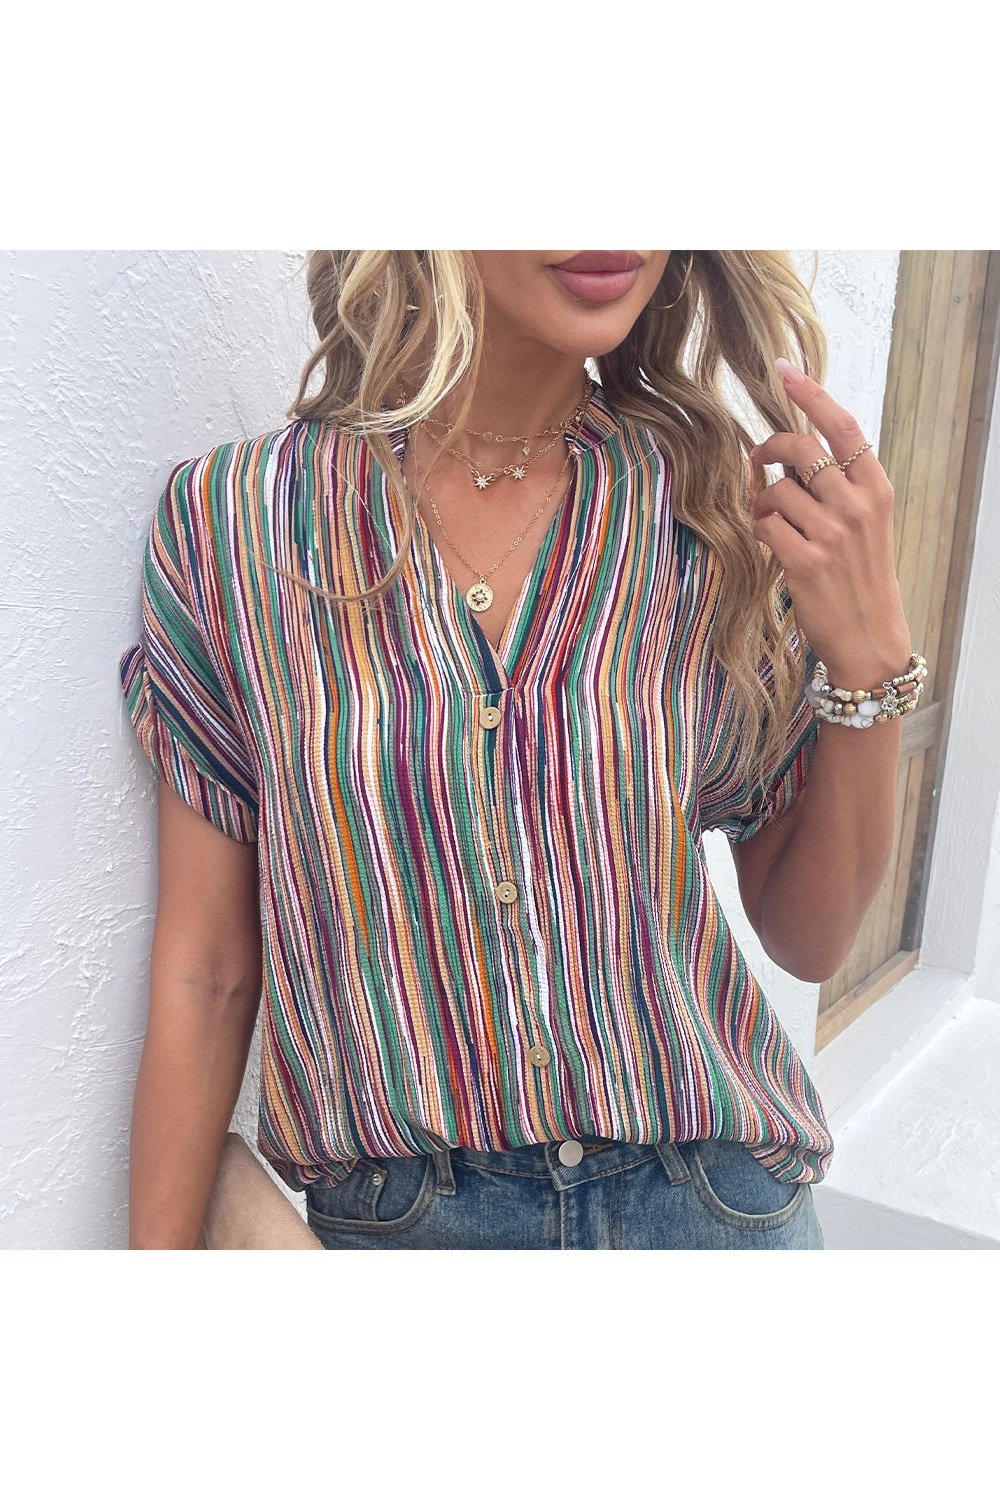 Multicolored Stripe Notched Neck Top - Shirts - FITGGINS